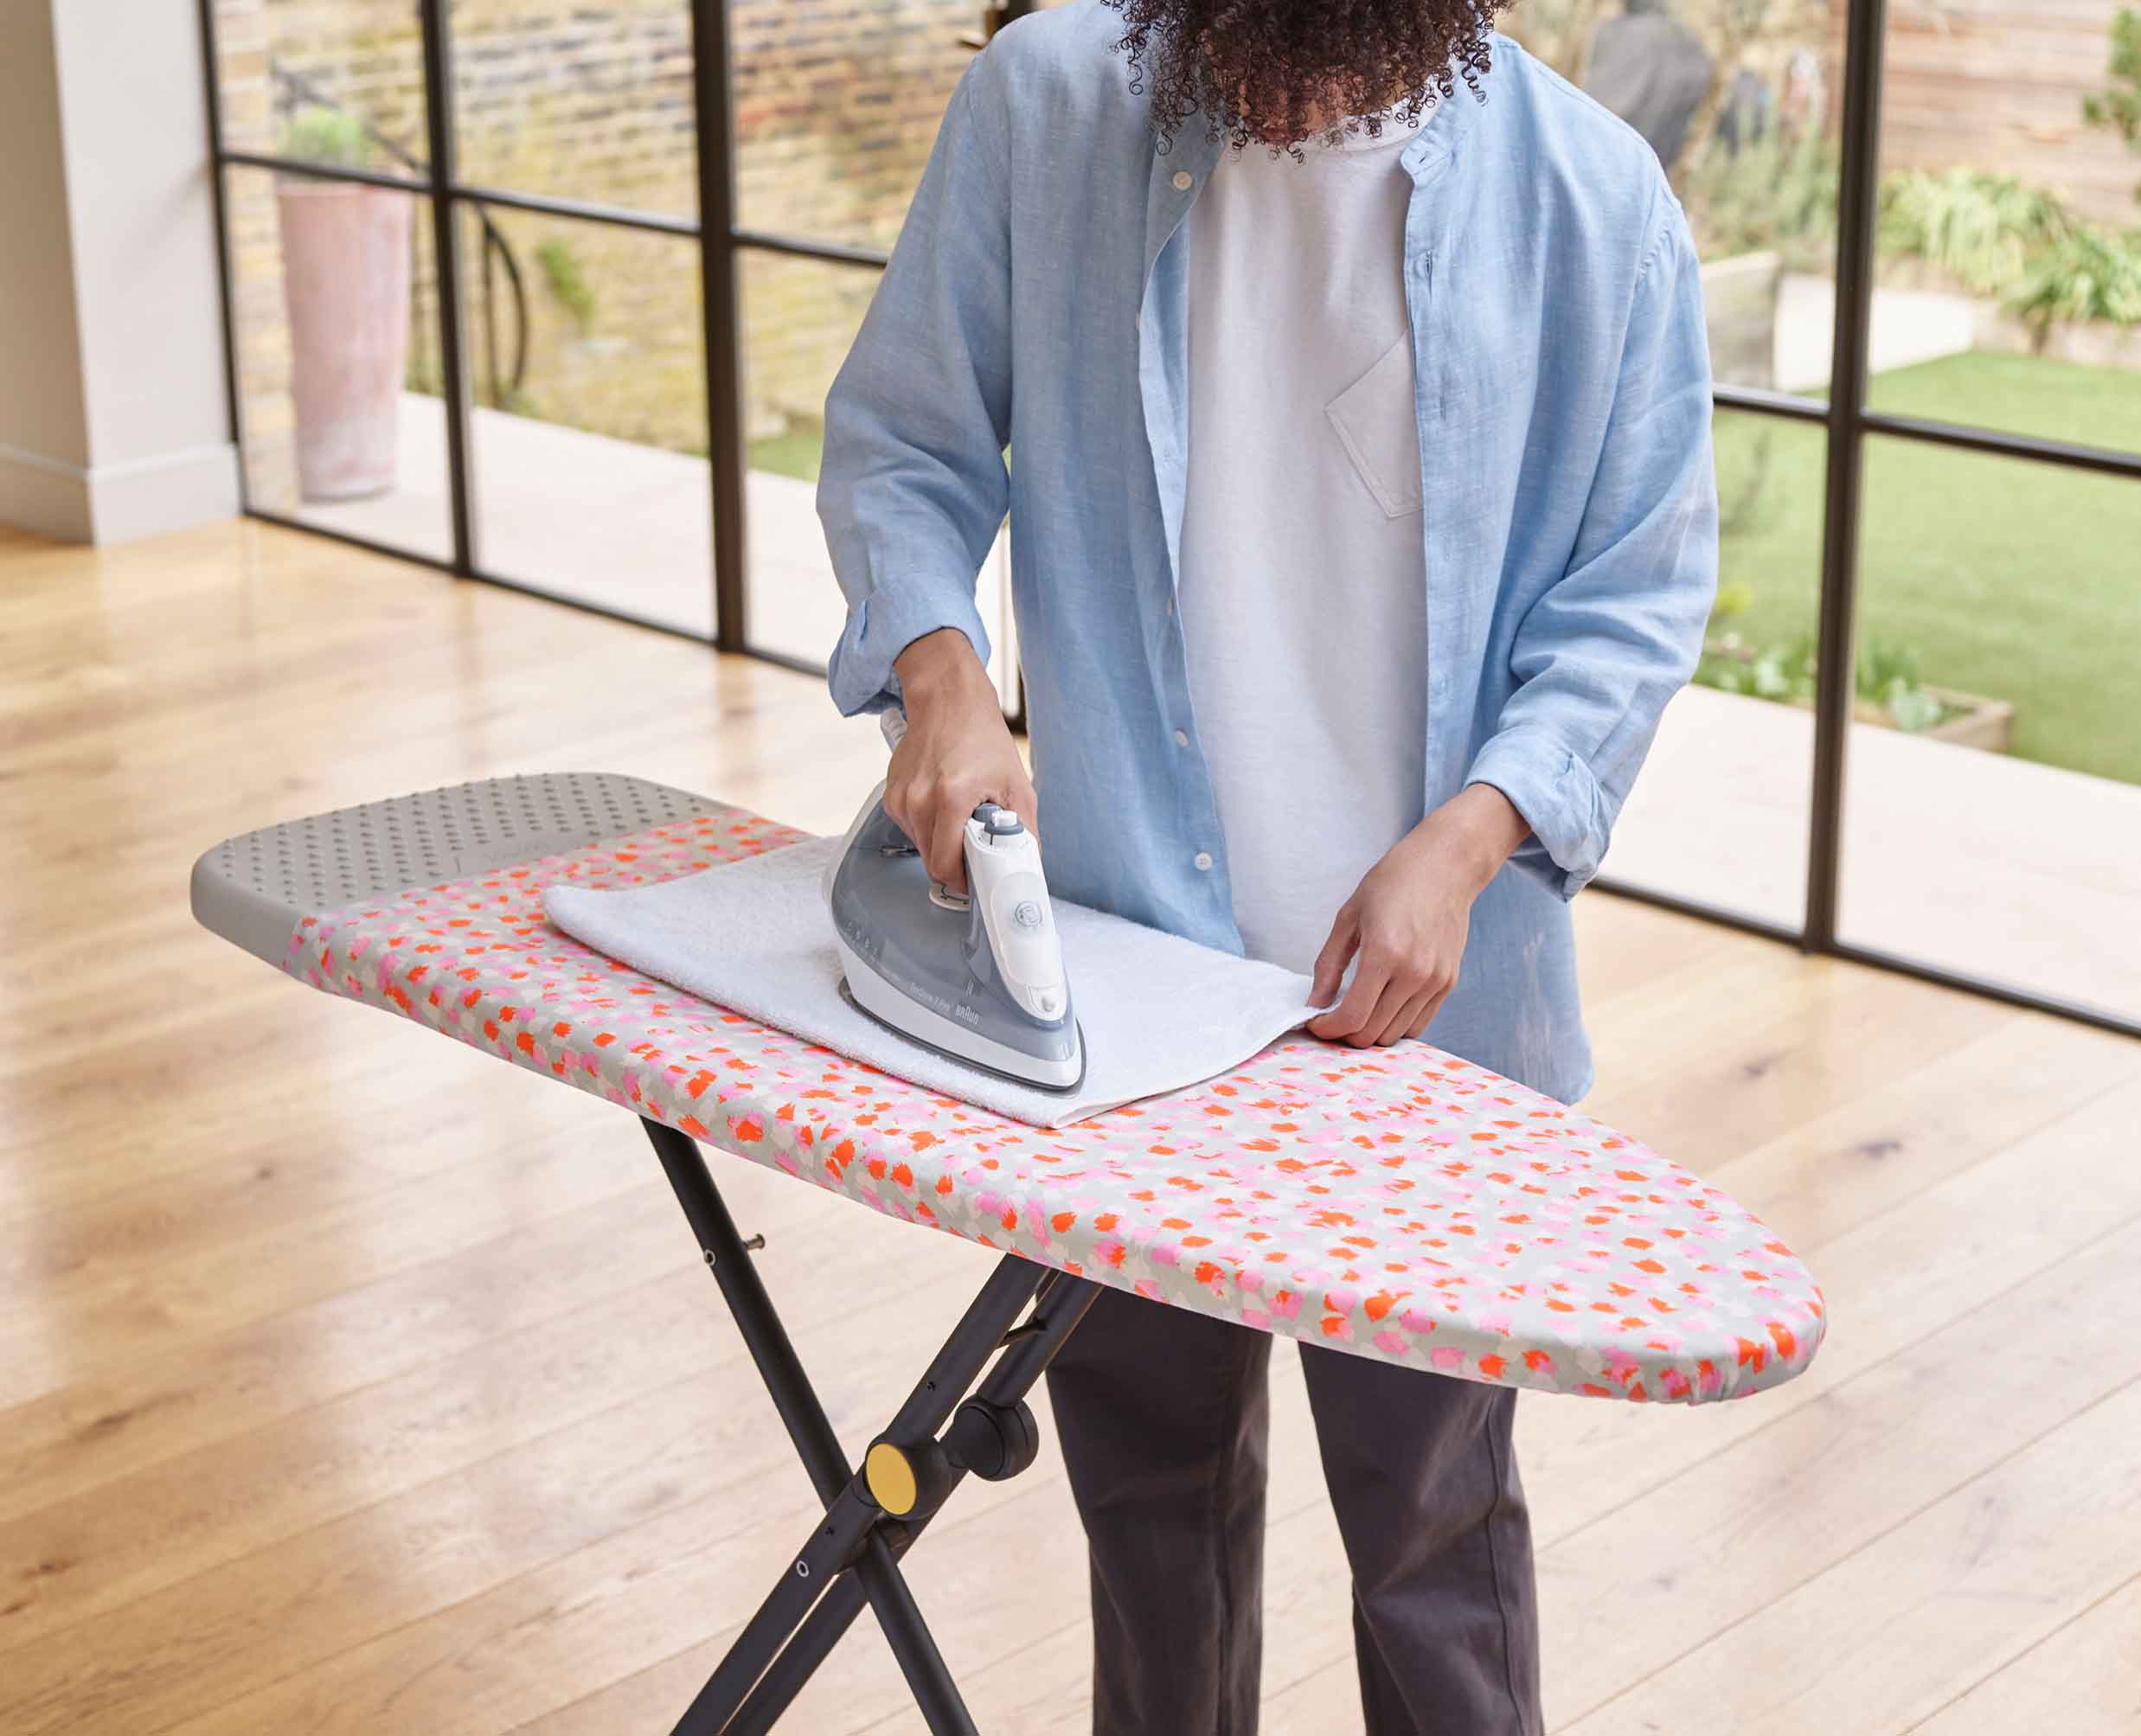 Glide Easy-store Ironing Board - 50031 - Image 3